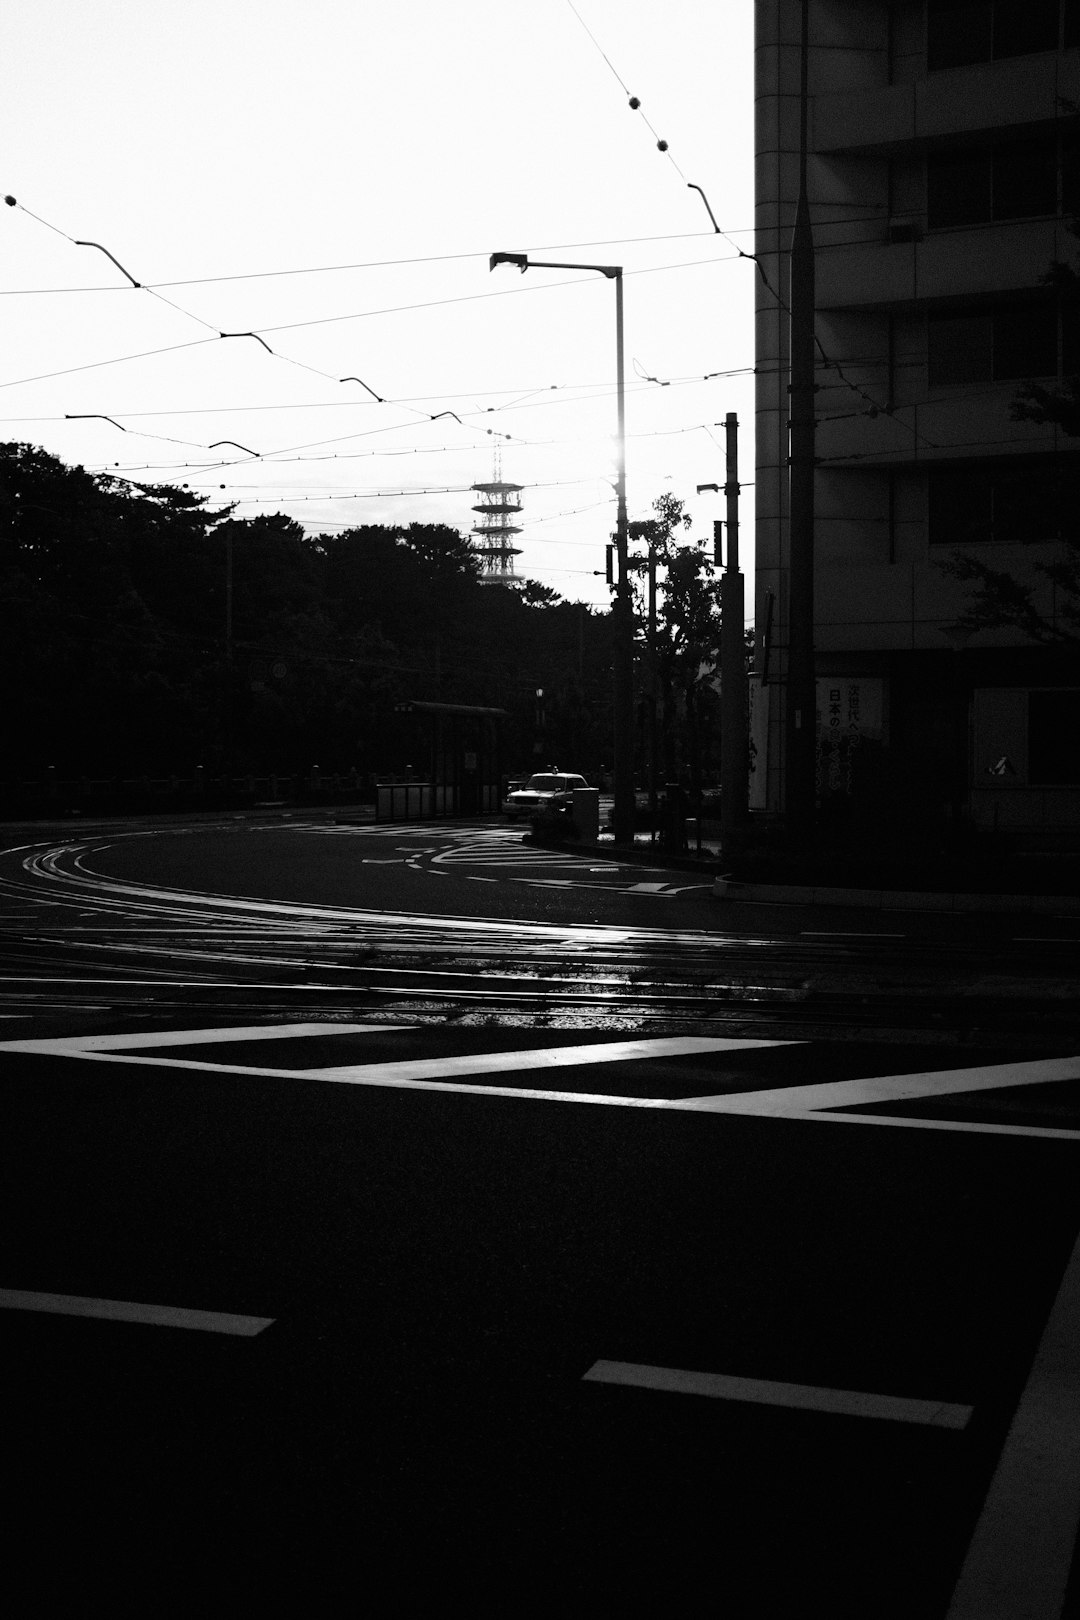 grayscale photo of a road with cars